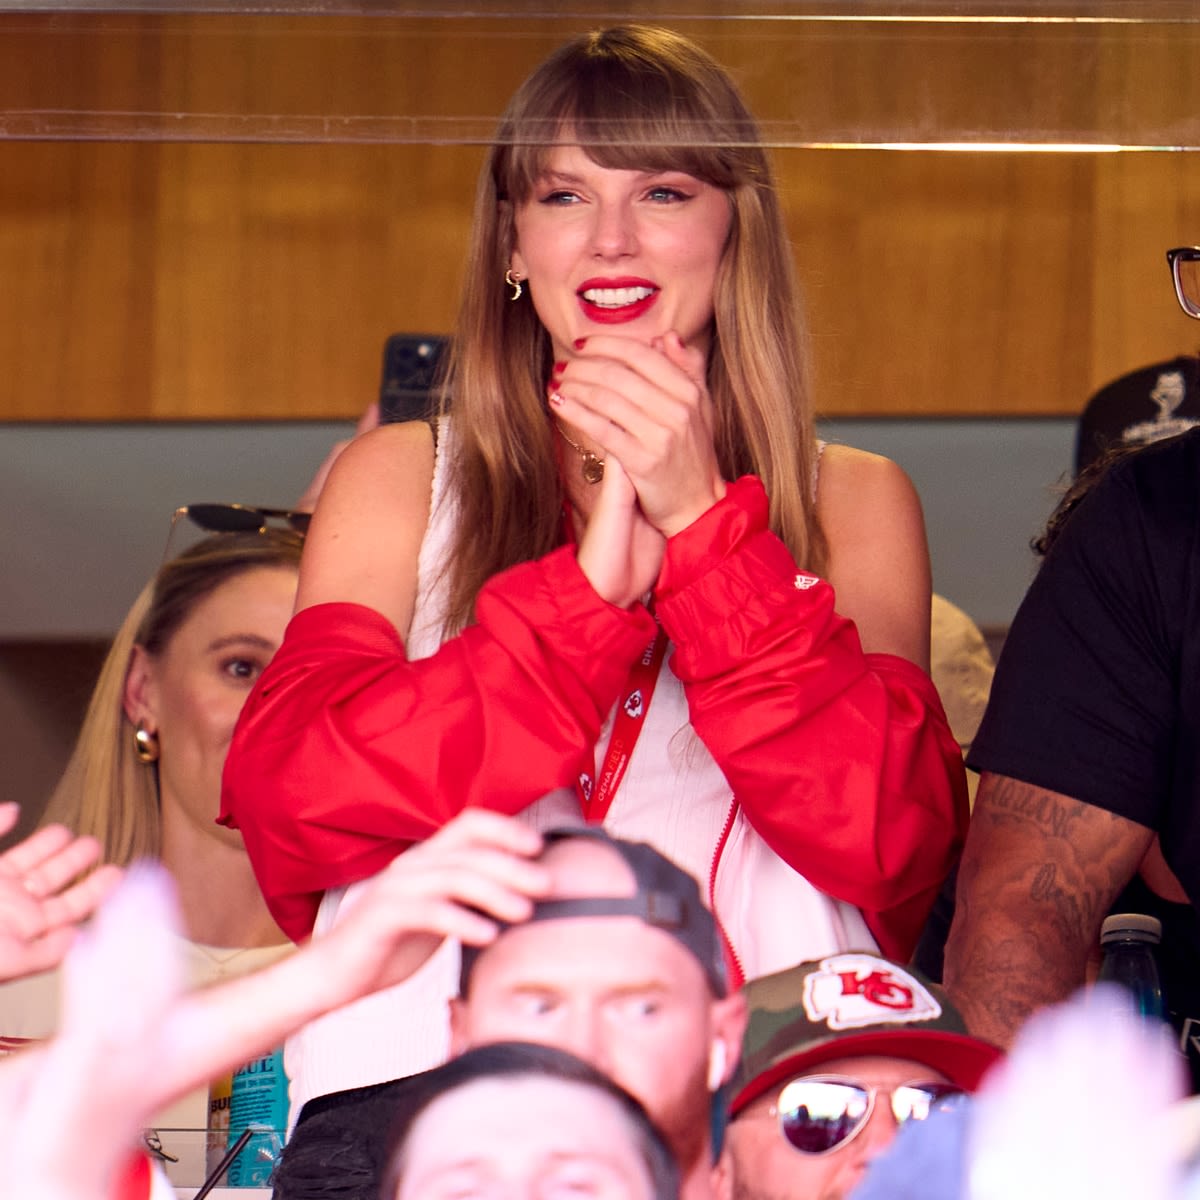 Why the NFL Considered Taylor Swift's Eras Tour in Their New Schedule